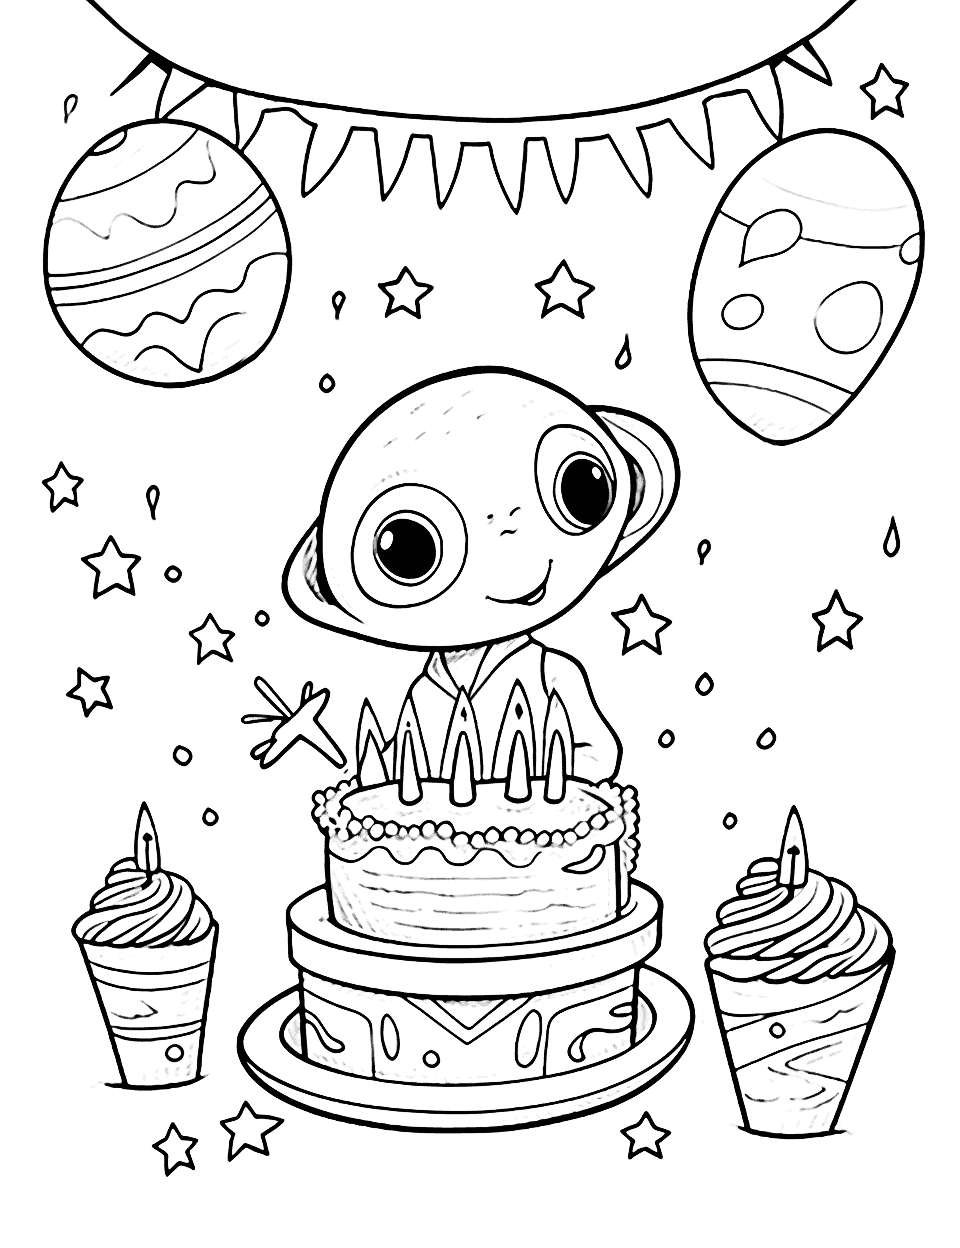 Alien's Space Birthday Happy Coloring Page - An alien having a birthday party on its spaceship.